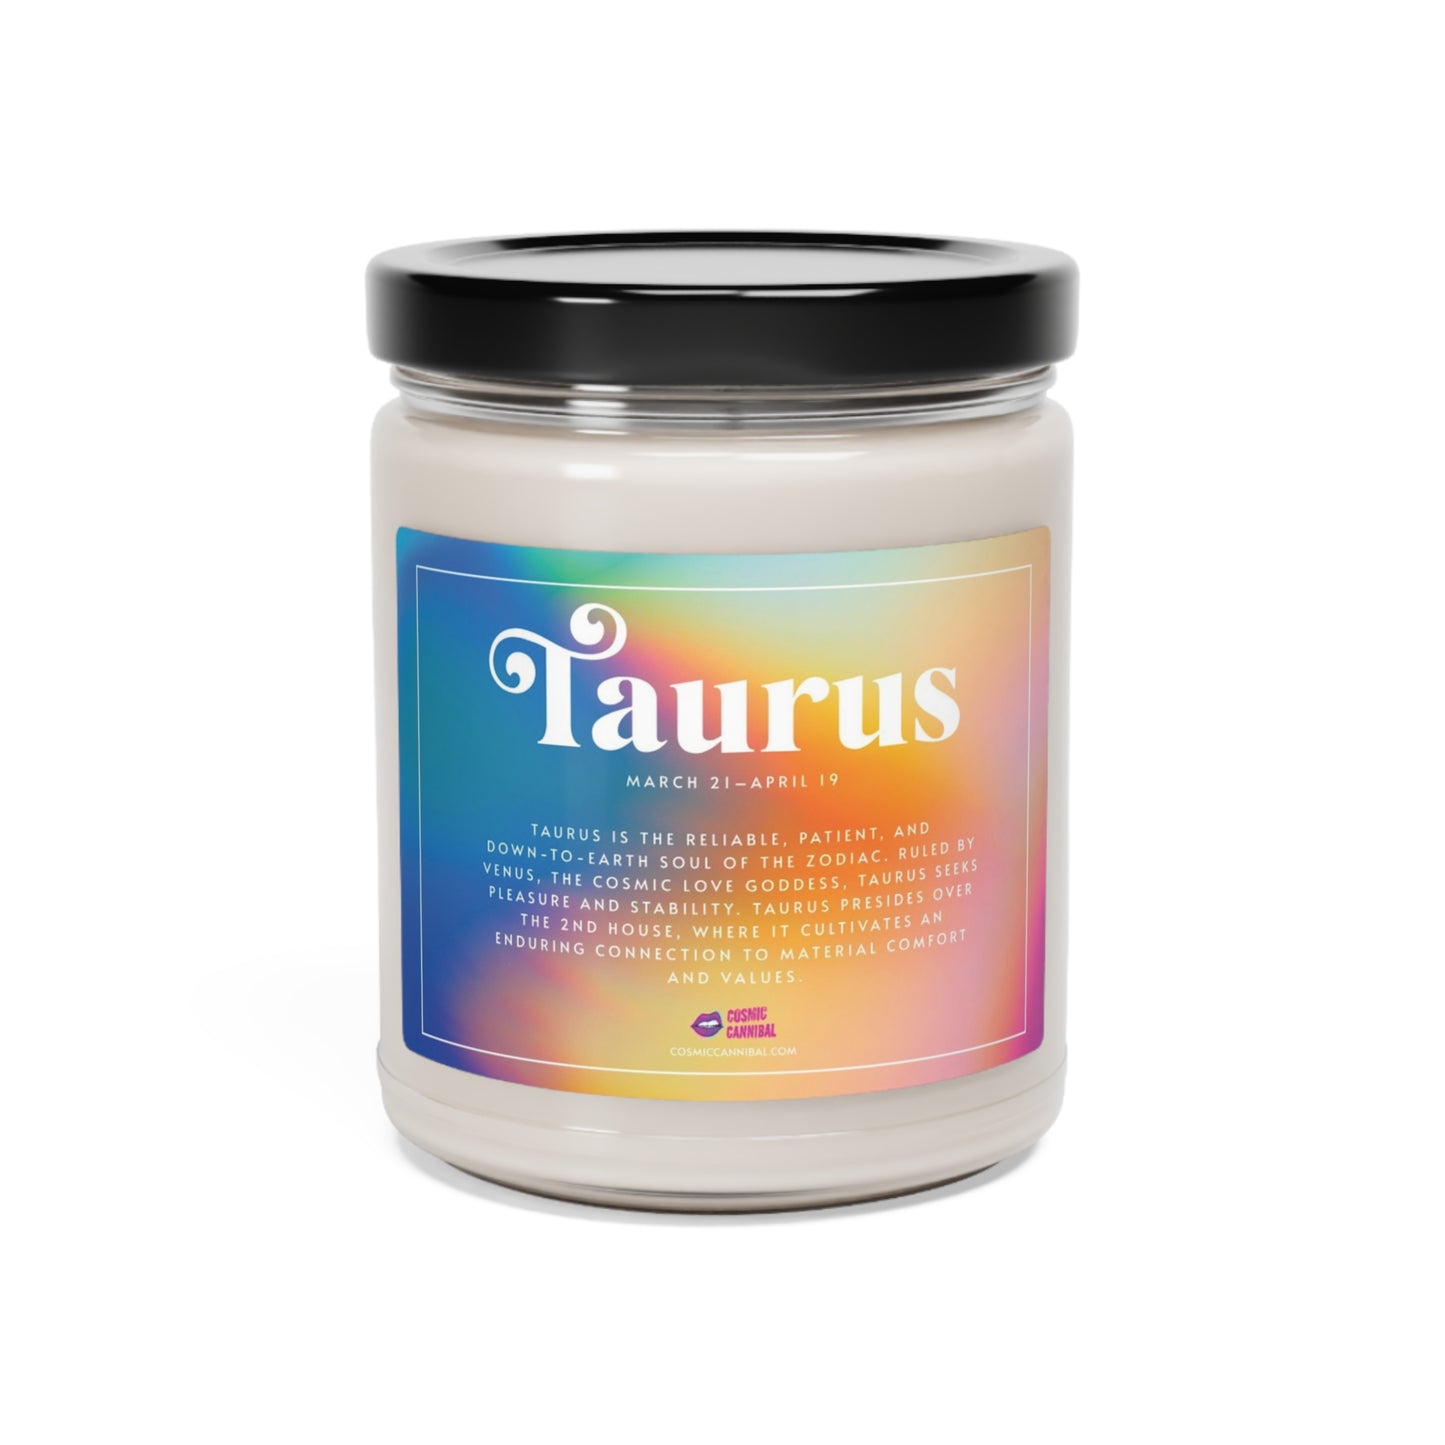 The Taurus Candle